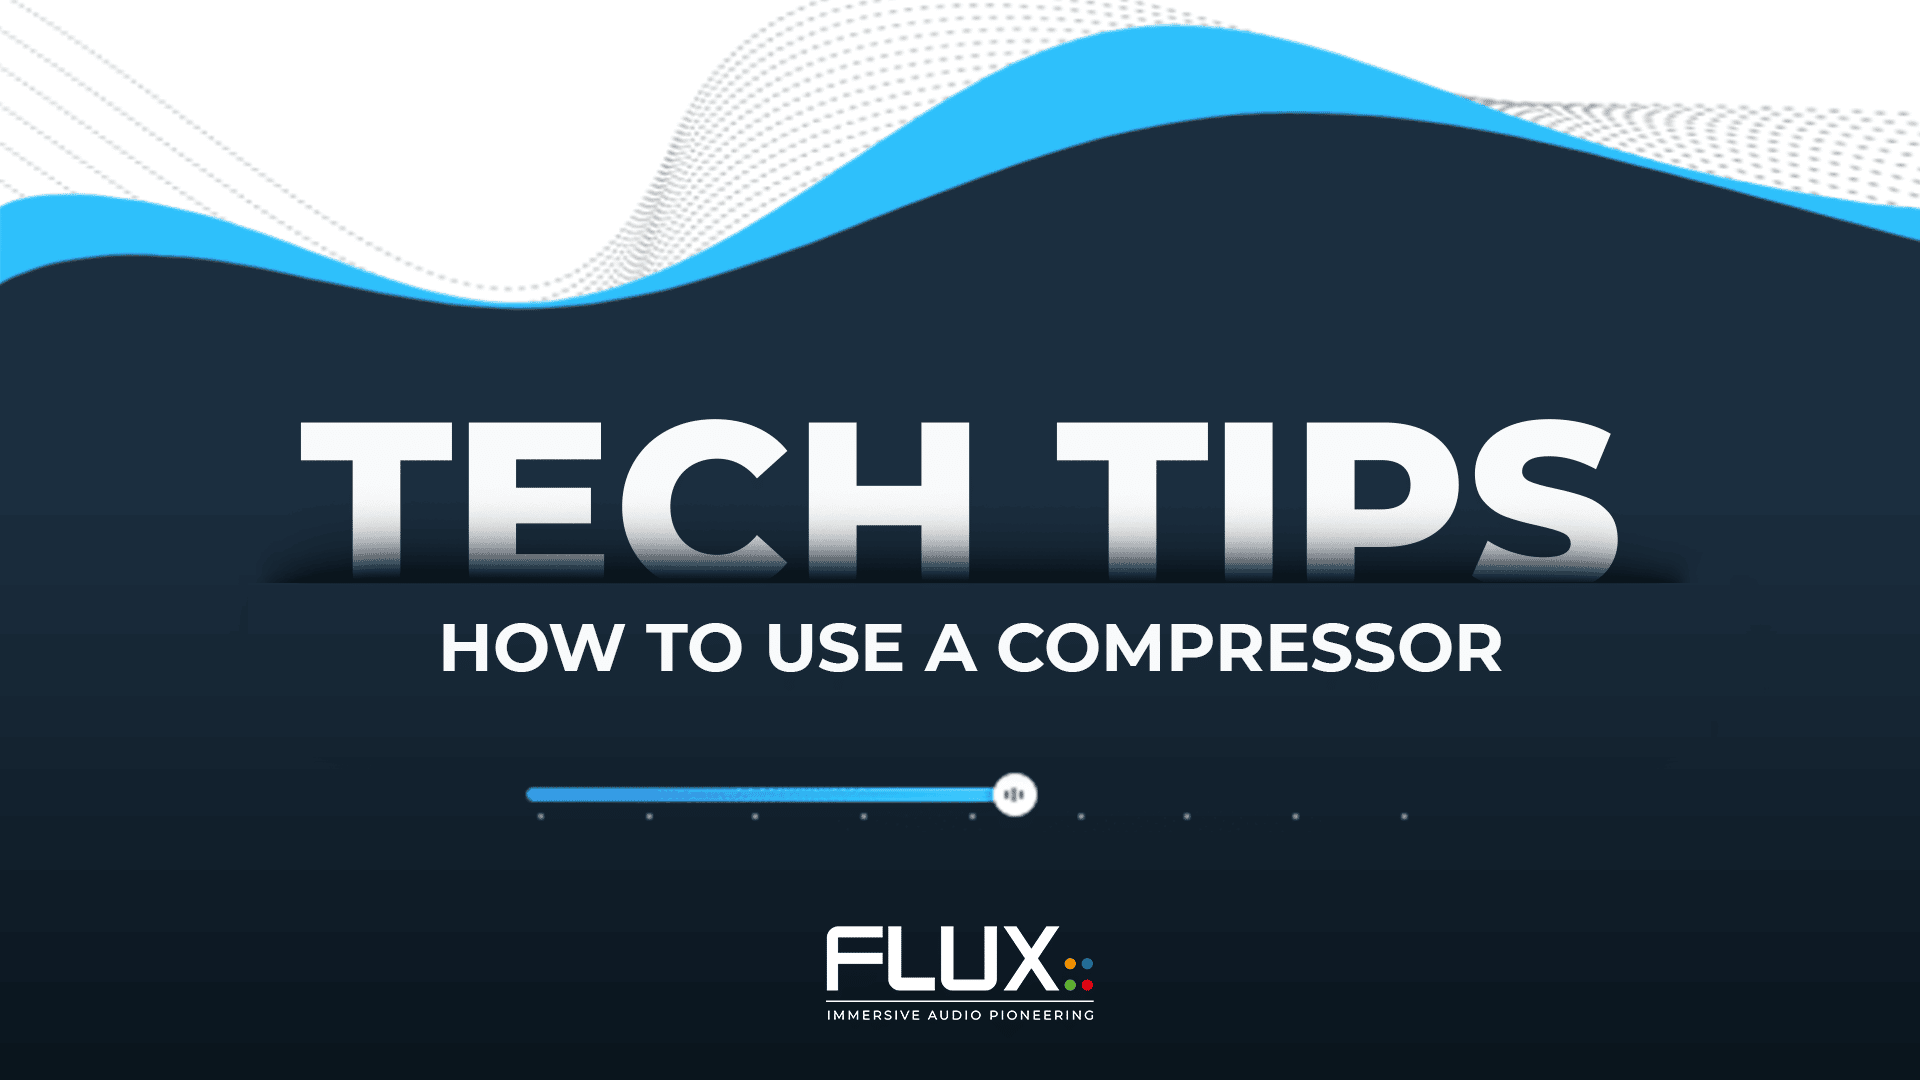 TECH TIPS - How to use a Compressor